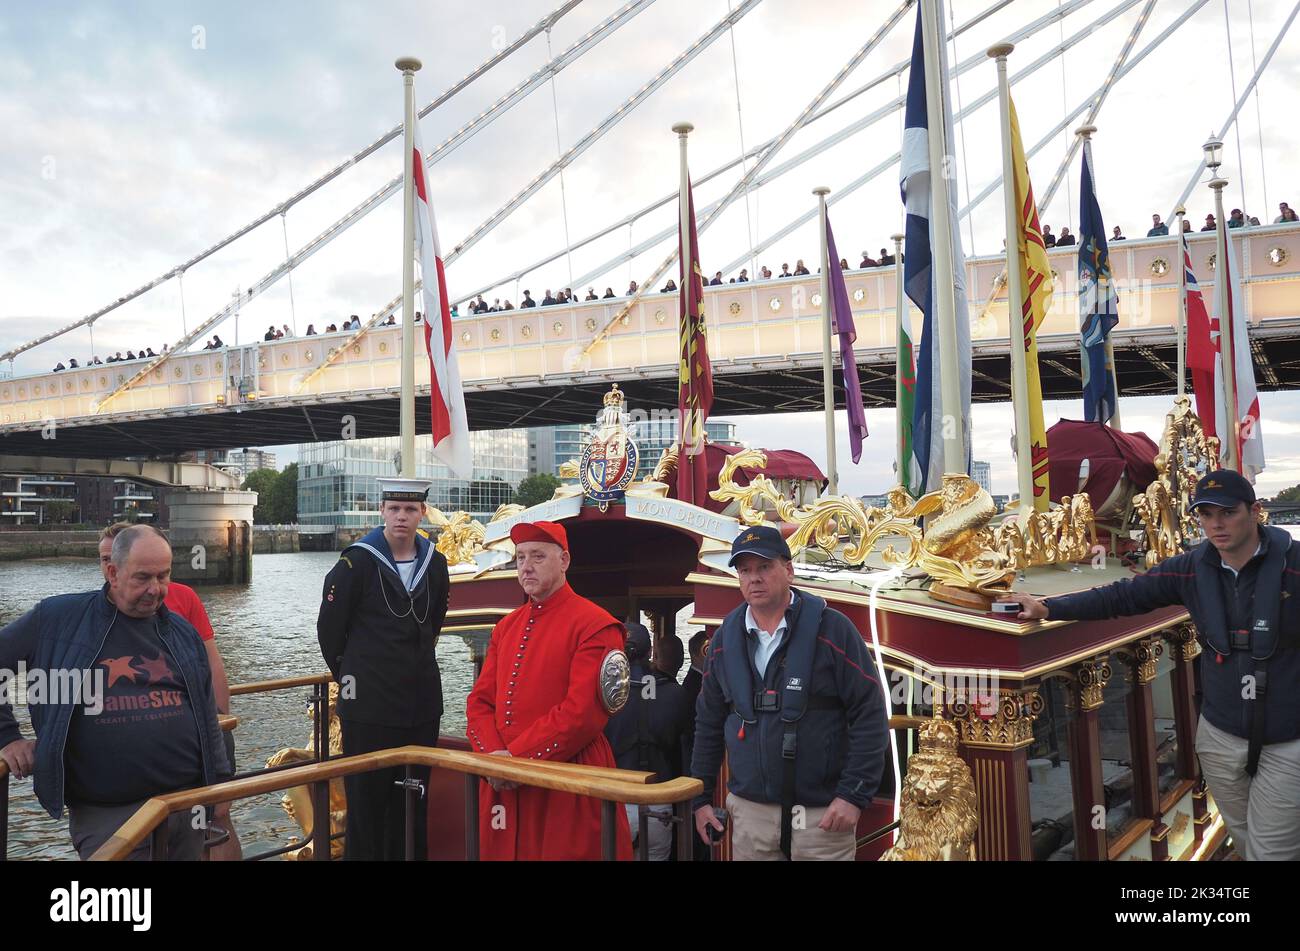 London, UK. 24th Sep, 2022. The crew of Royal Row Barge “Gloriana” prepare to take part in the Thames Flotilla -150 illuminated boats sailing down the Thames in support of the RNLI. Credit: Brian Minkoff /Alamy Live News Stock Photo